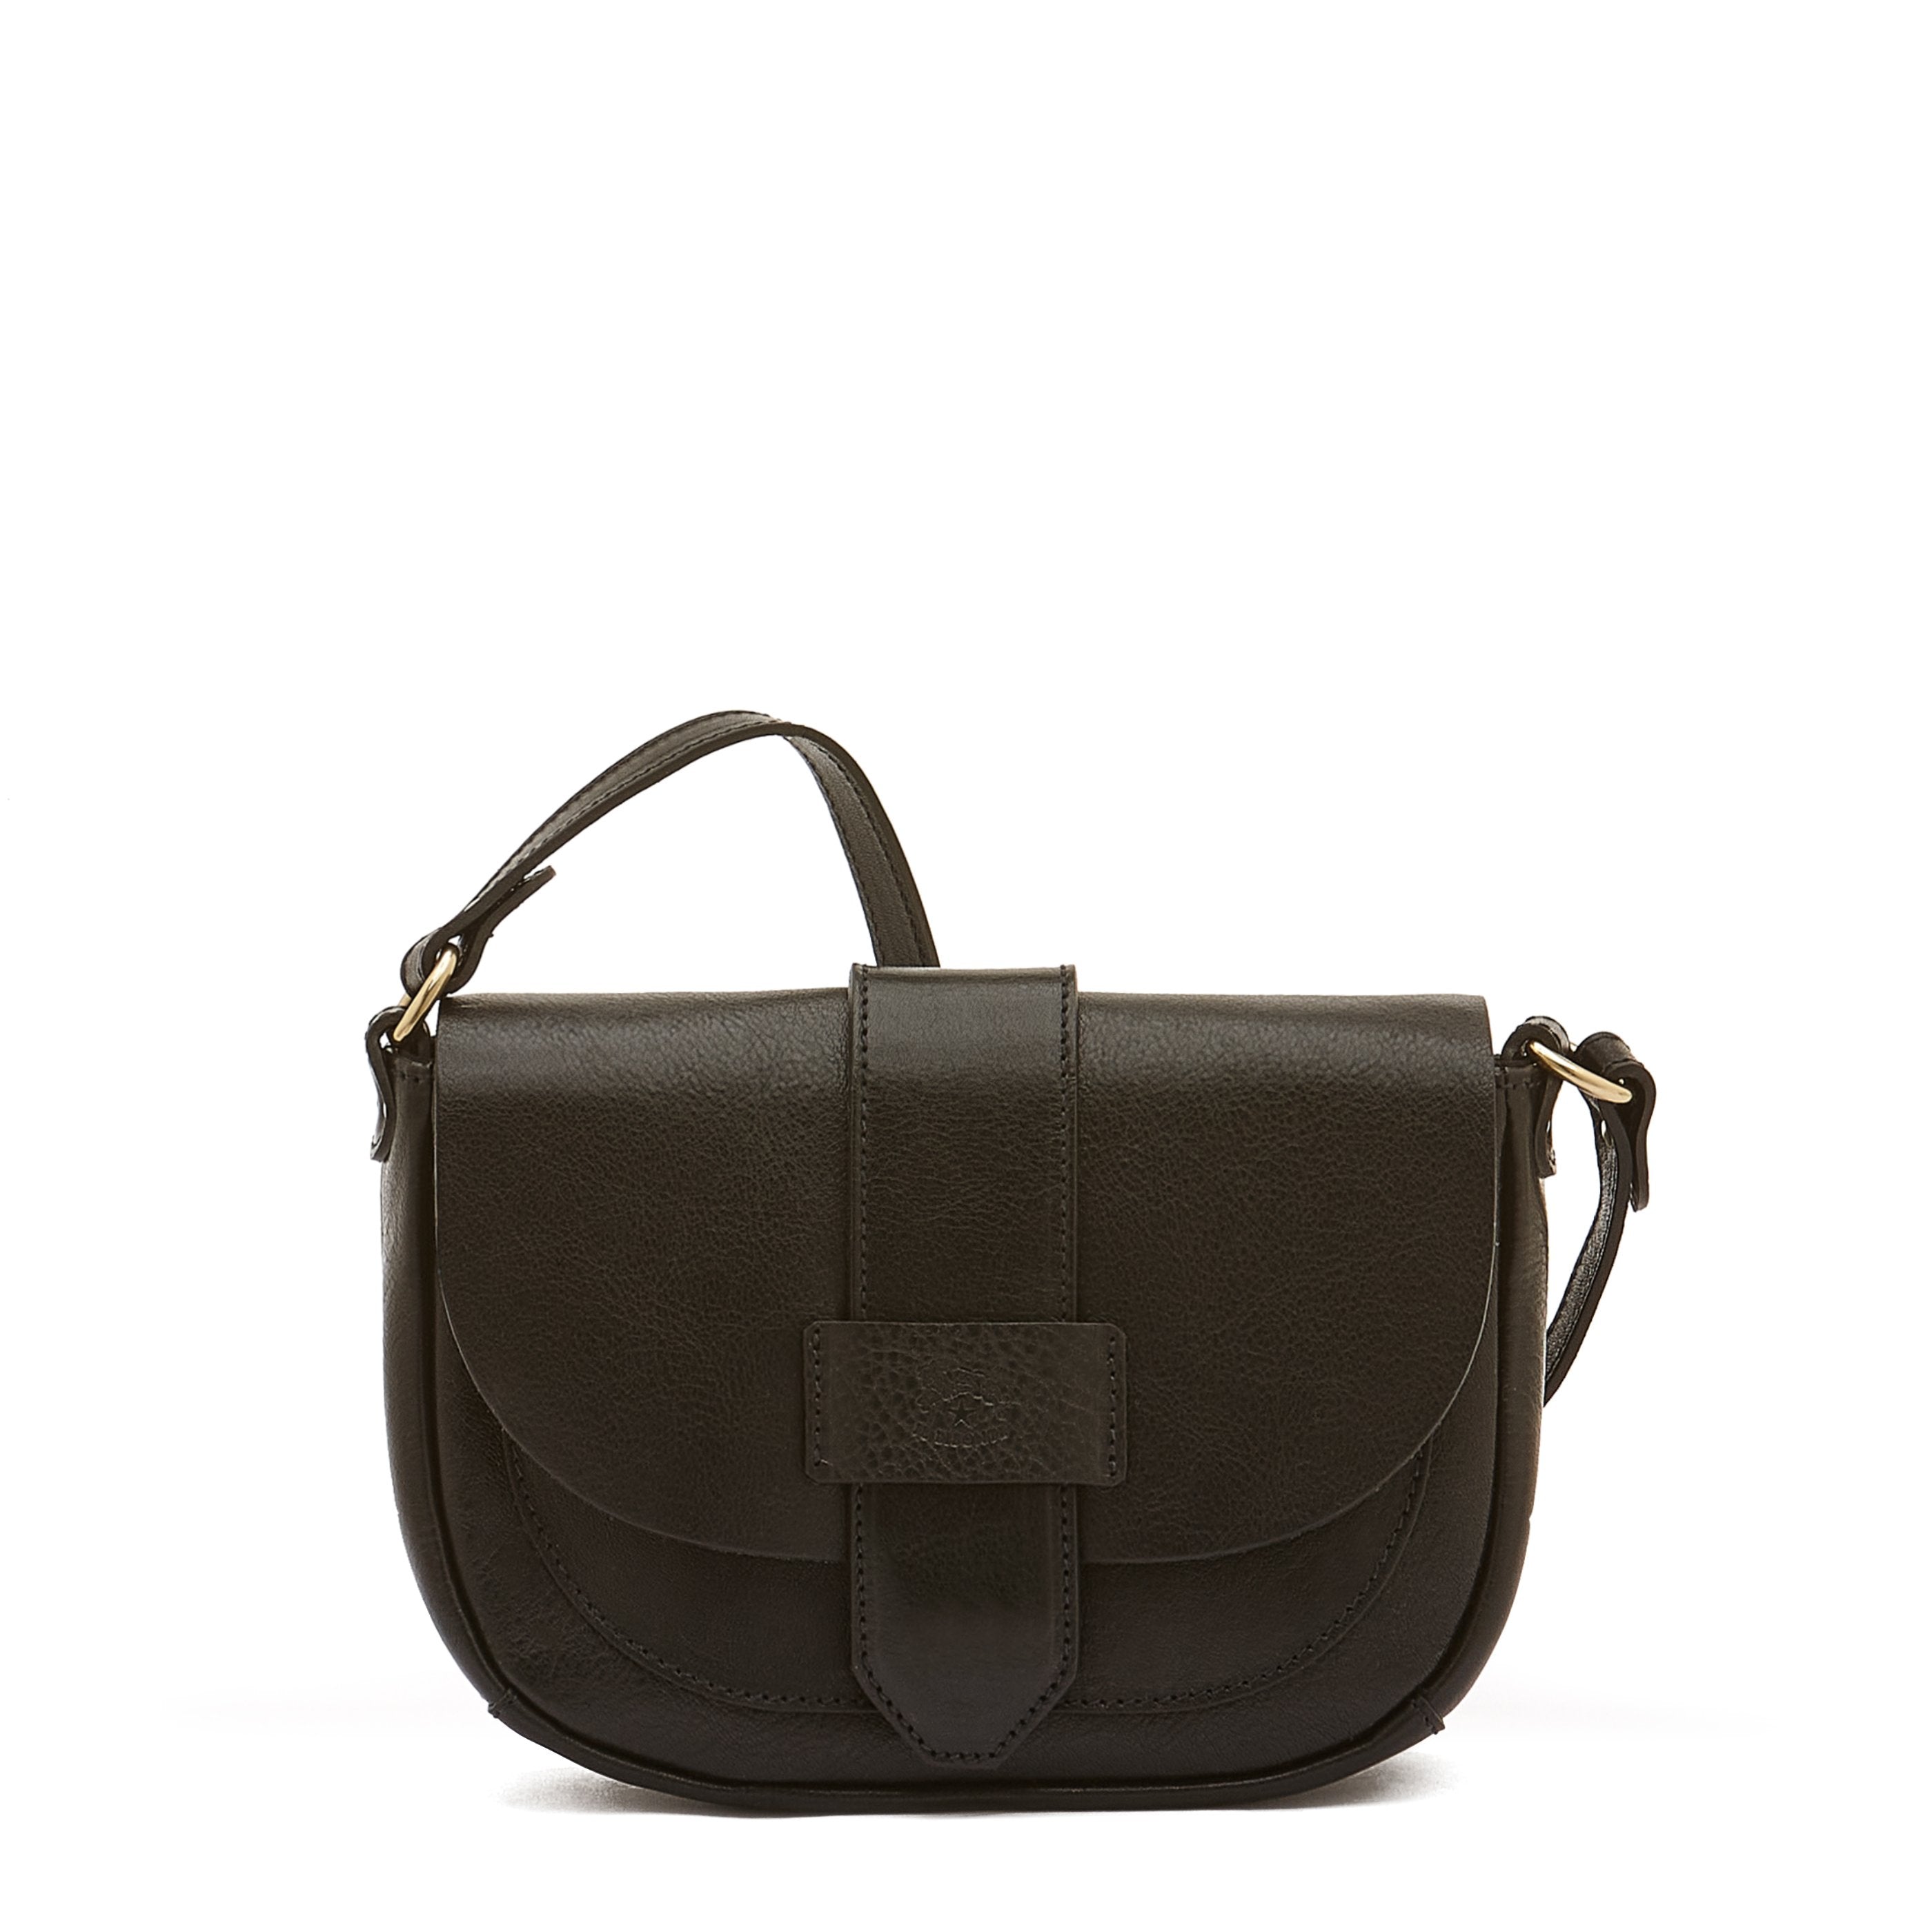 Fausta Small | Women's crossbody bag in leather color black